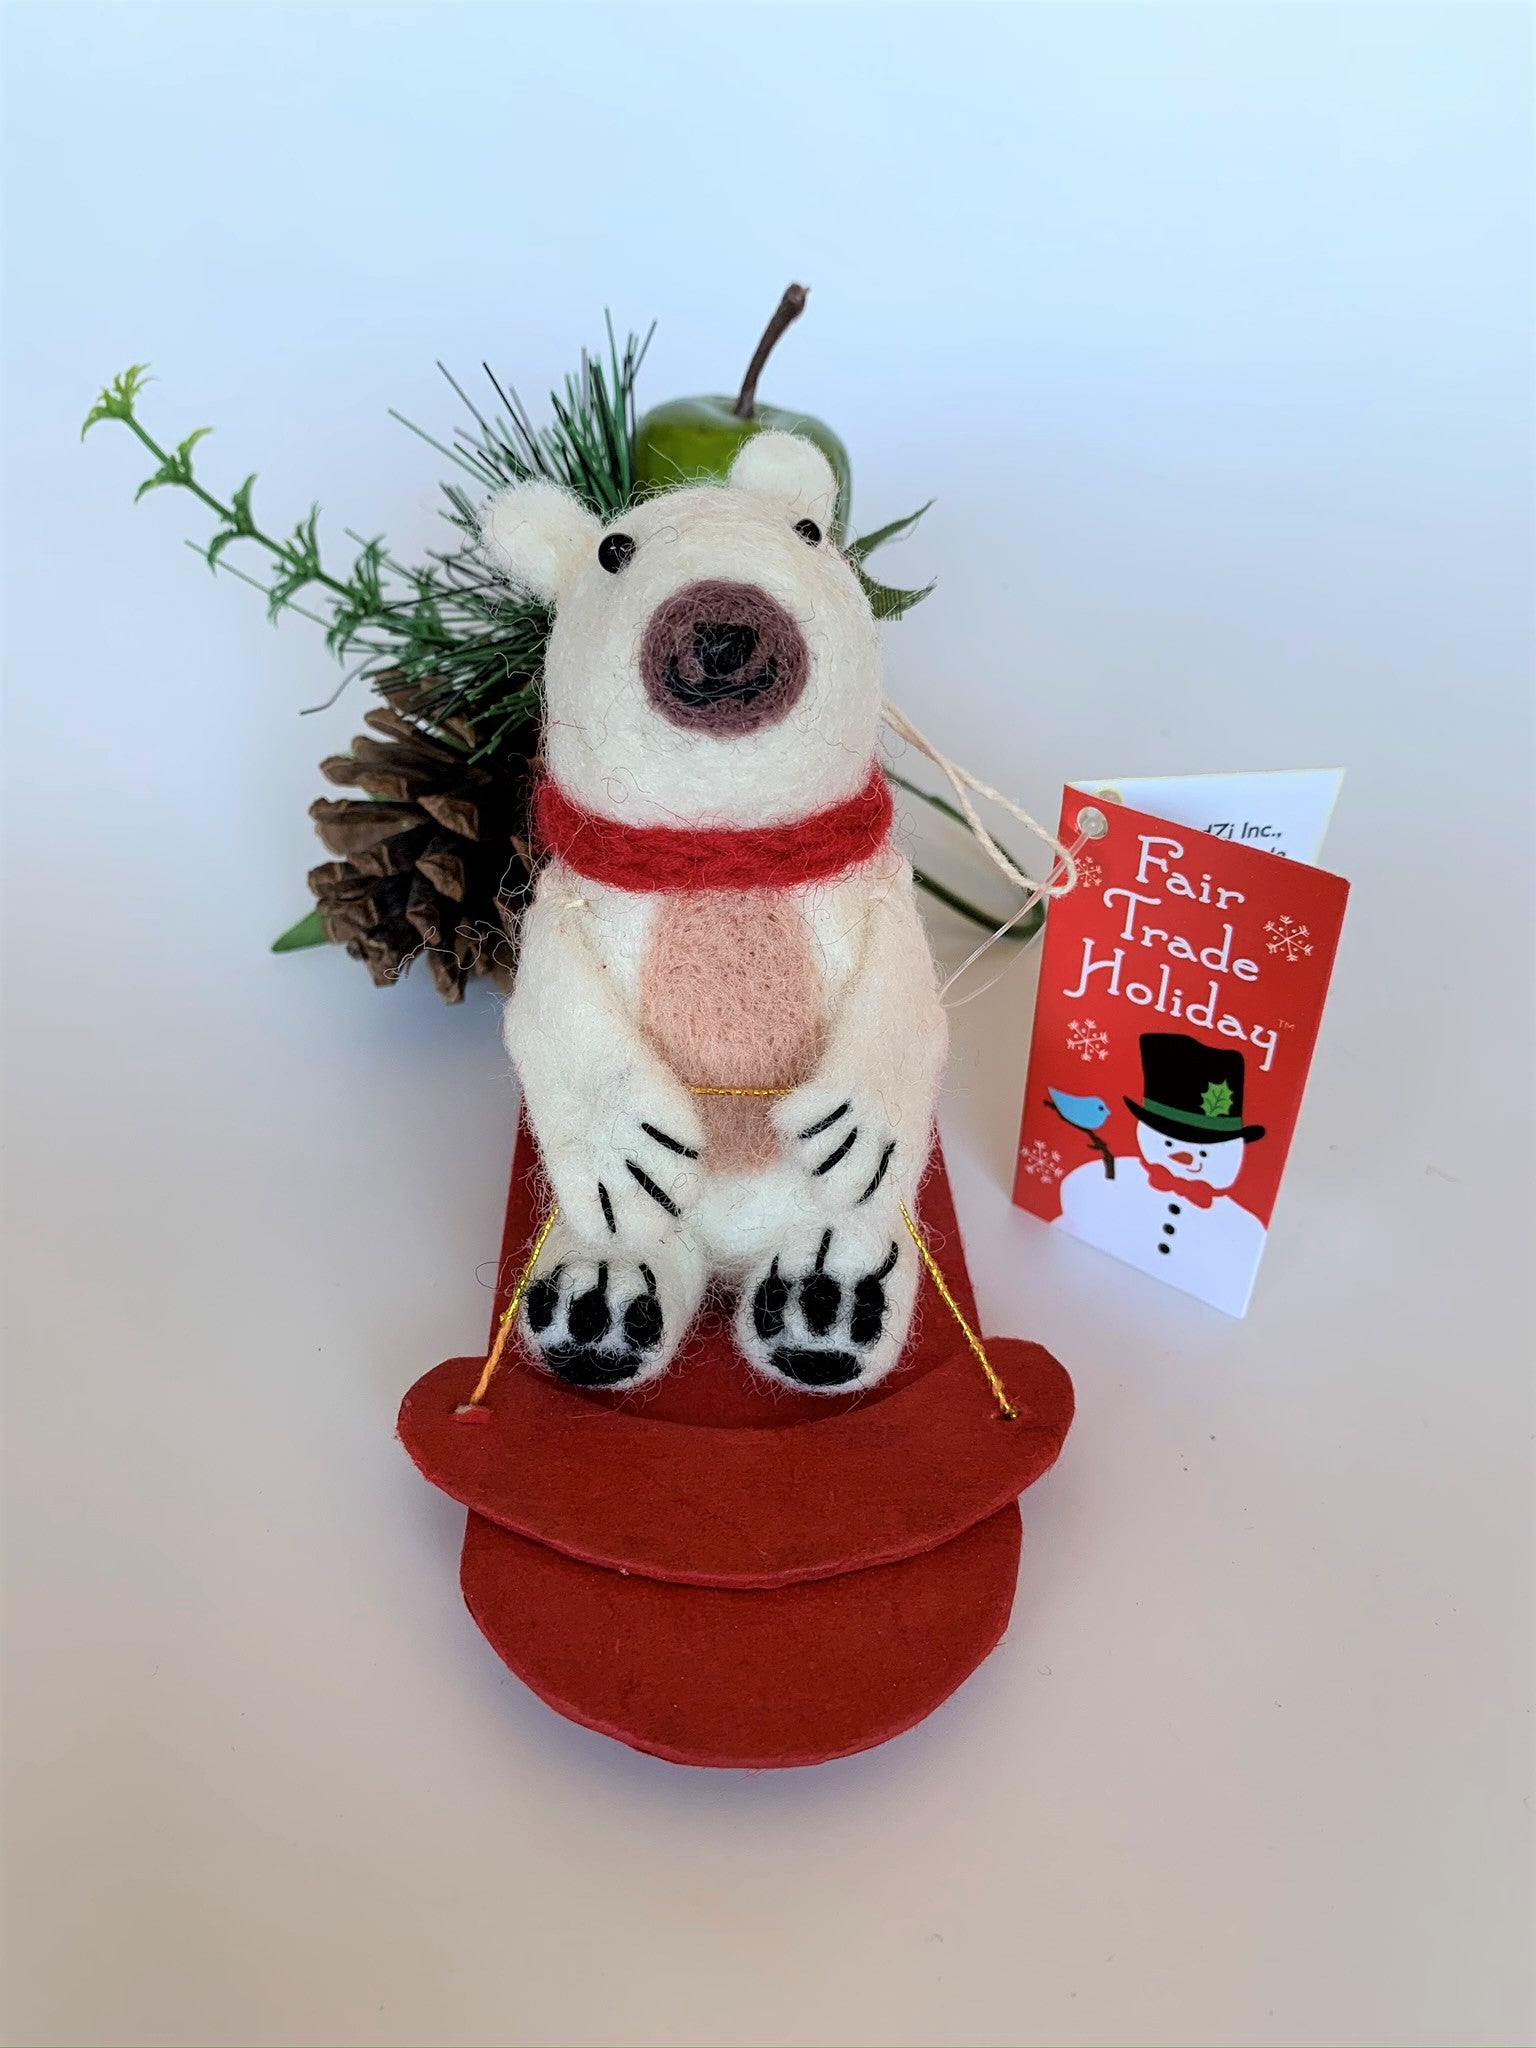 This sledding polar bear Christmas Ornament is handcrafted (fair trade). The polar bear is made of 100% natural wool and the sled is handmade with paper that is hardened and feels somewhat like very thin wood and it is red.  The bear is off-white with a tan belly, brownish-gray muzzle, black accents (paws, nose, etc.) and is wearing a red winter scarf.  It is approximately 4.75"x3.5"x2.5". It comes with a fair trade holiday "to/from" tag to use if giving this as a gift.